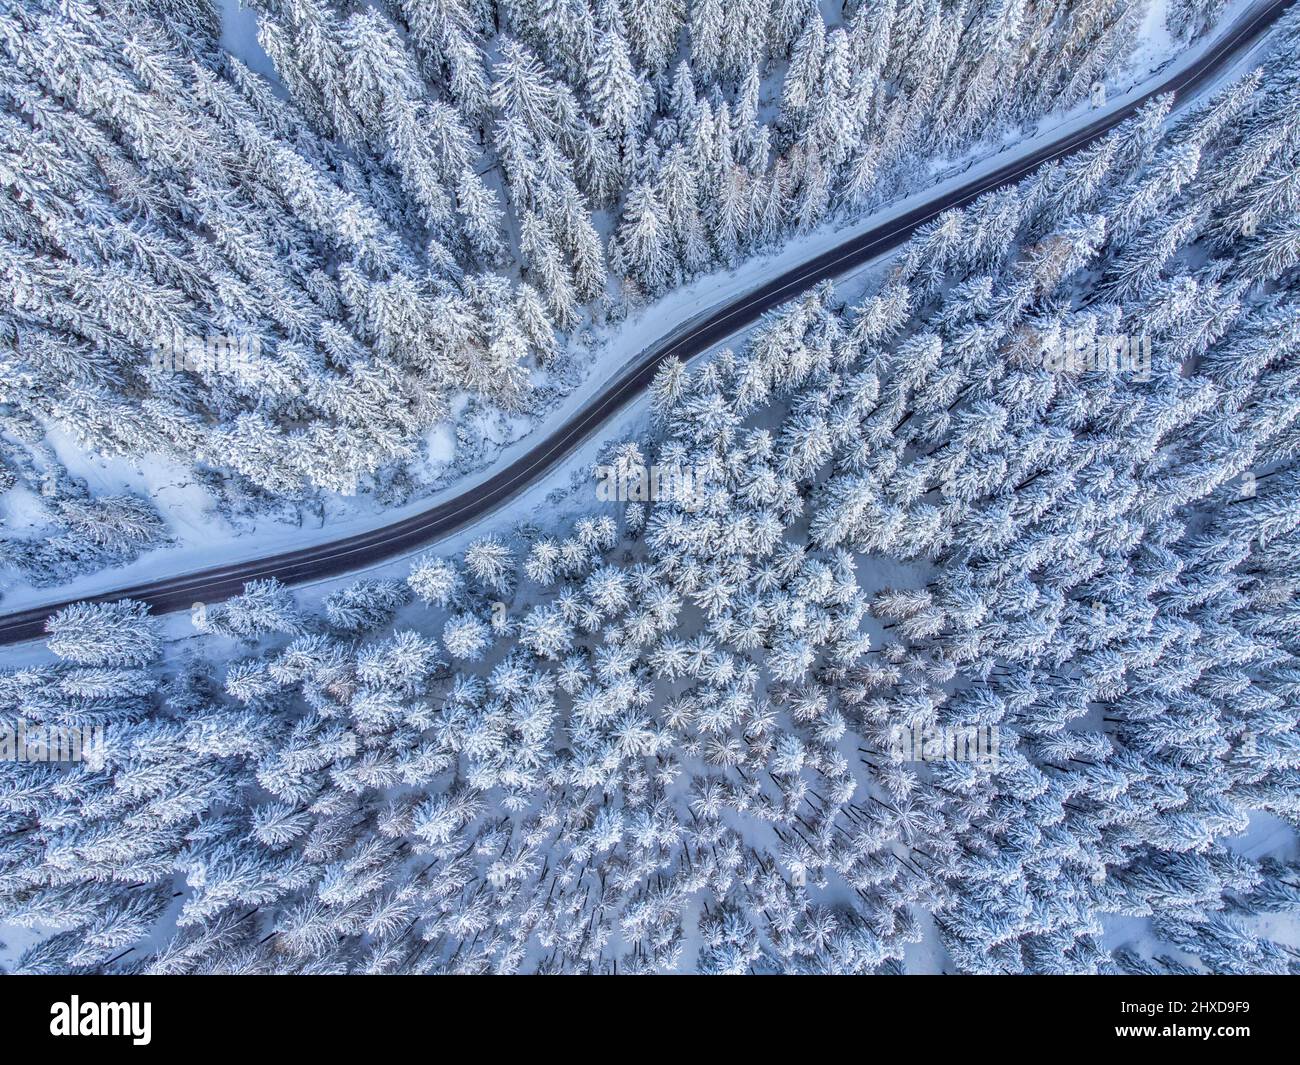 Europe, Italy, Veneto, province of Belluno, Dolomites, mountain road crossing a coniferous forest after a snowfall, view from above Stock Photo